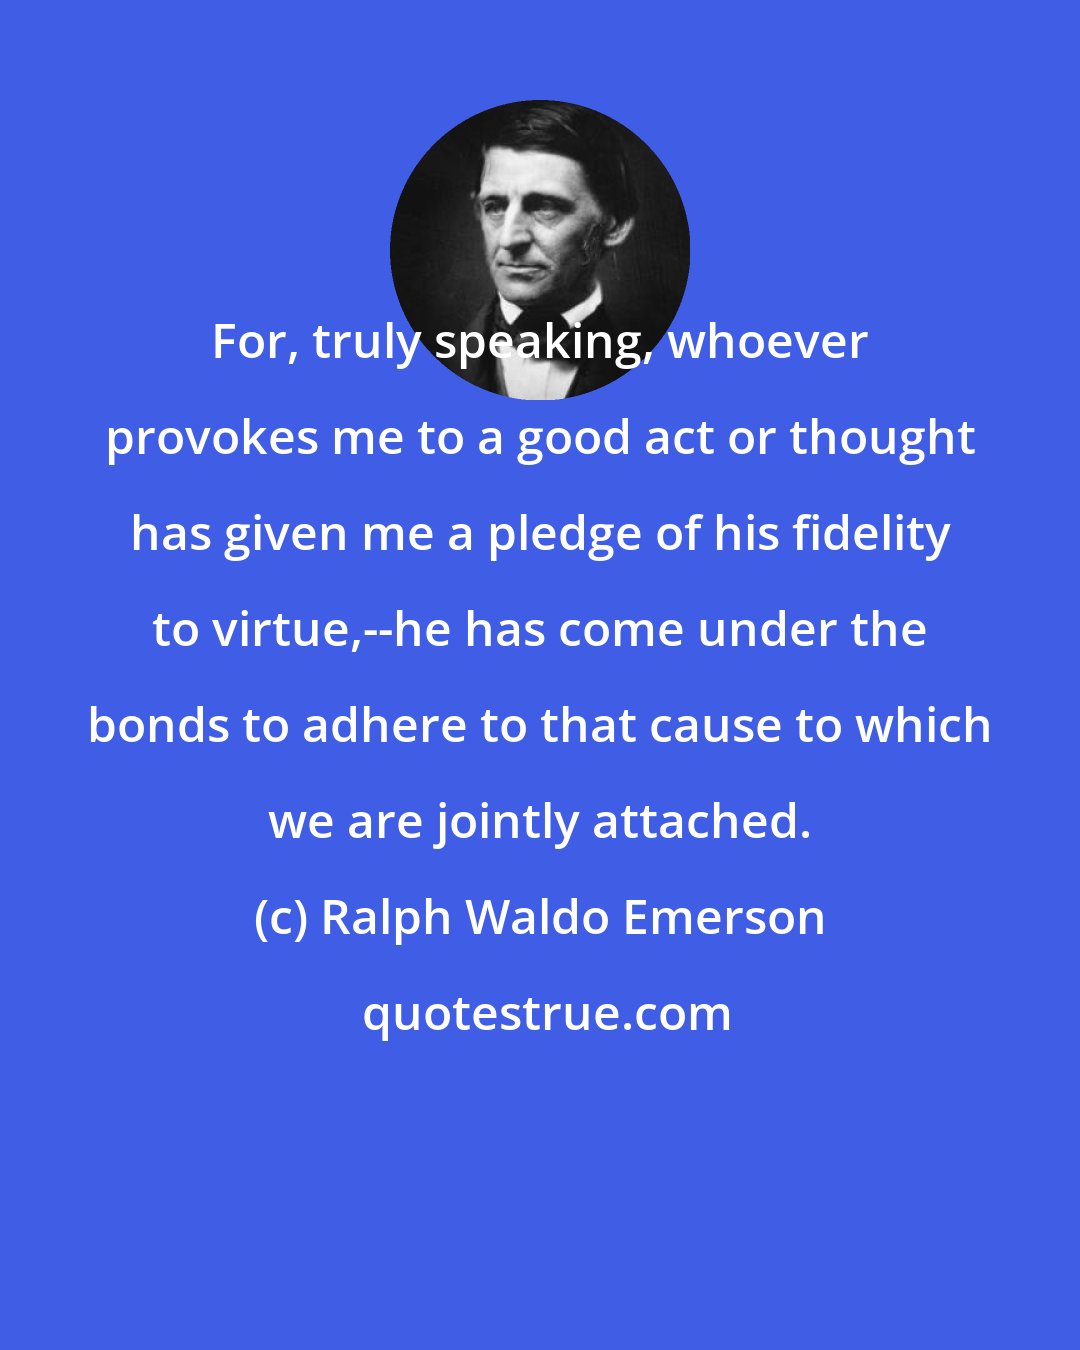 Ralph Waldo Emerson: For, truly speaking, whoever provokes me to a good act or thought has given me a pledge of his fidelity to virtue,--he has come under the bonds to adhere to that cause to which we are jointly attached.